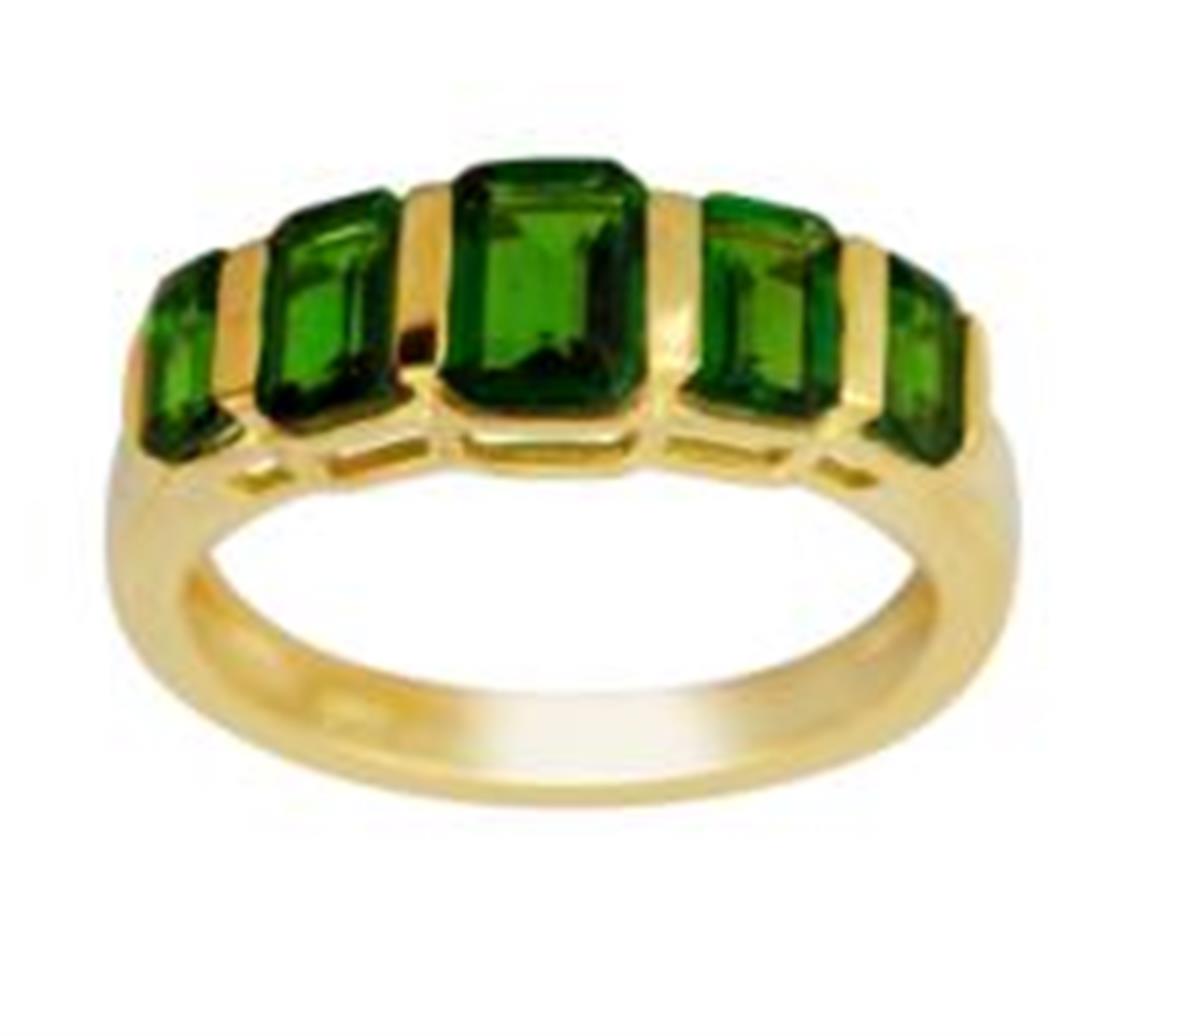 10K Yellow Gold 5-Stone Graduated Emerald Cut Chrome Diopside Fashion Ring